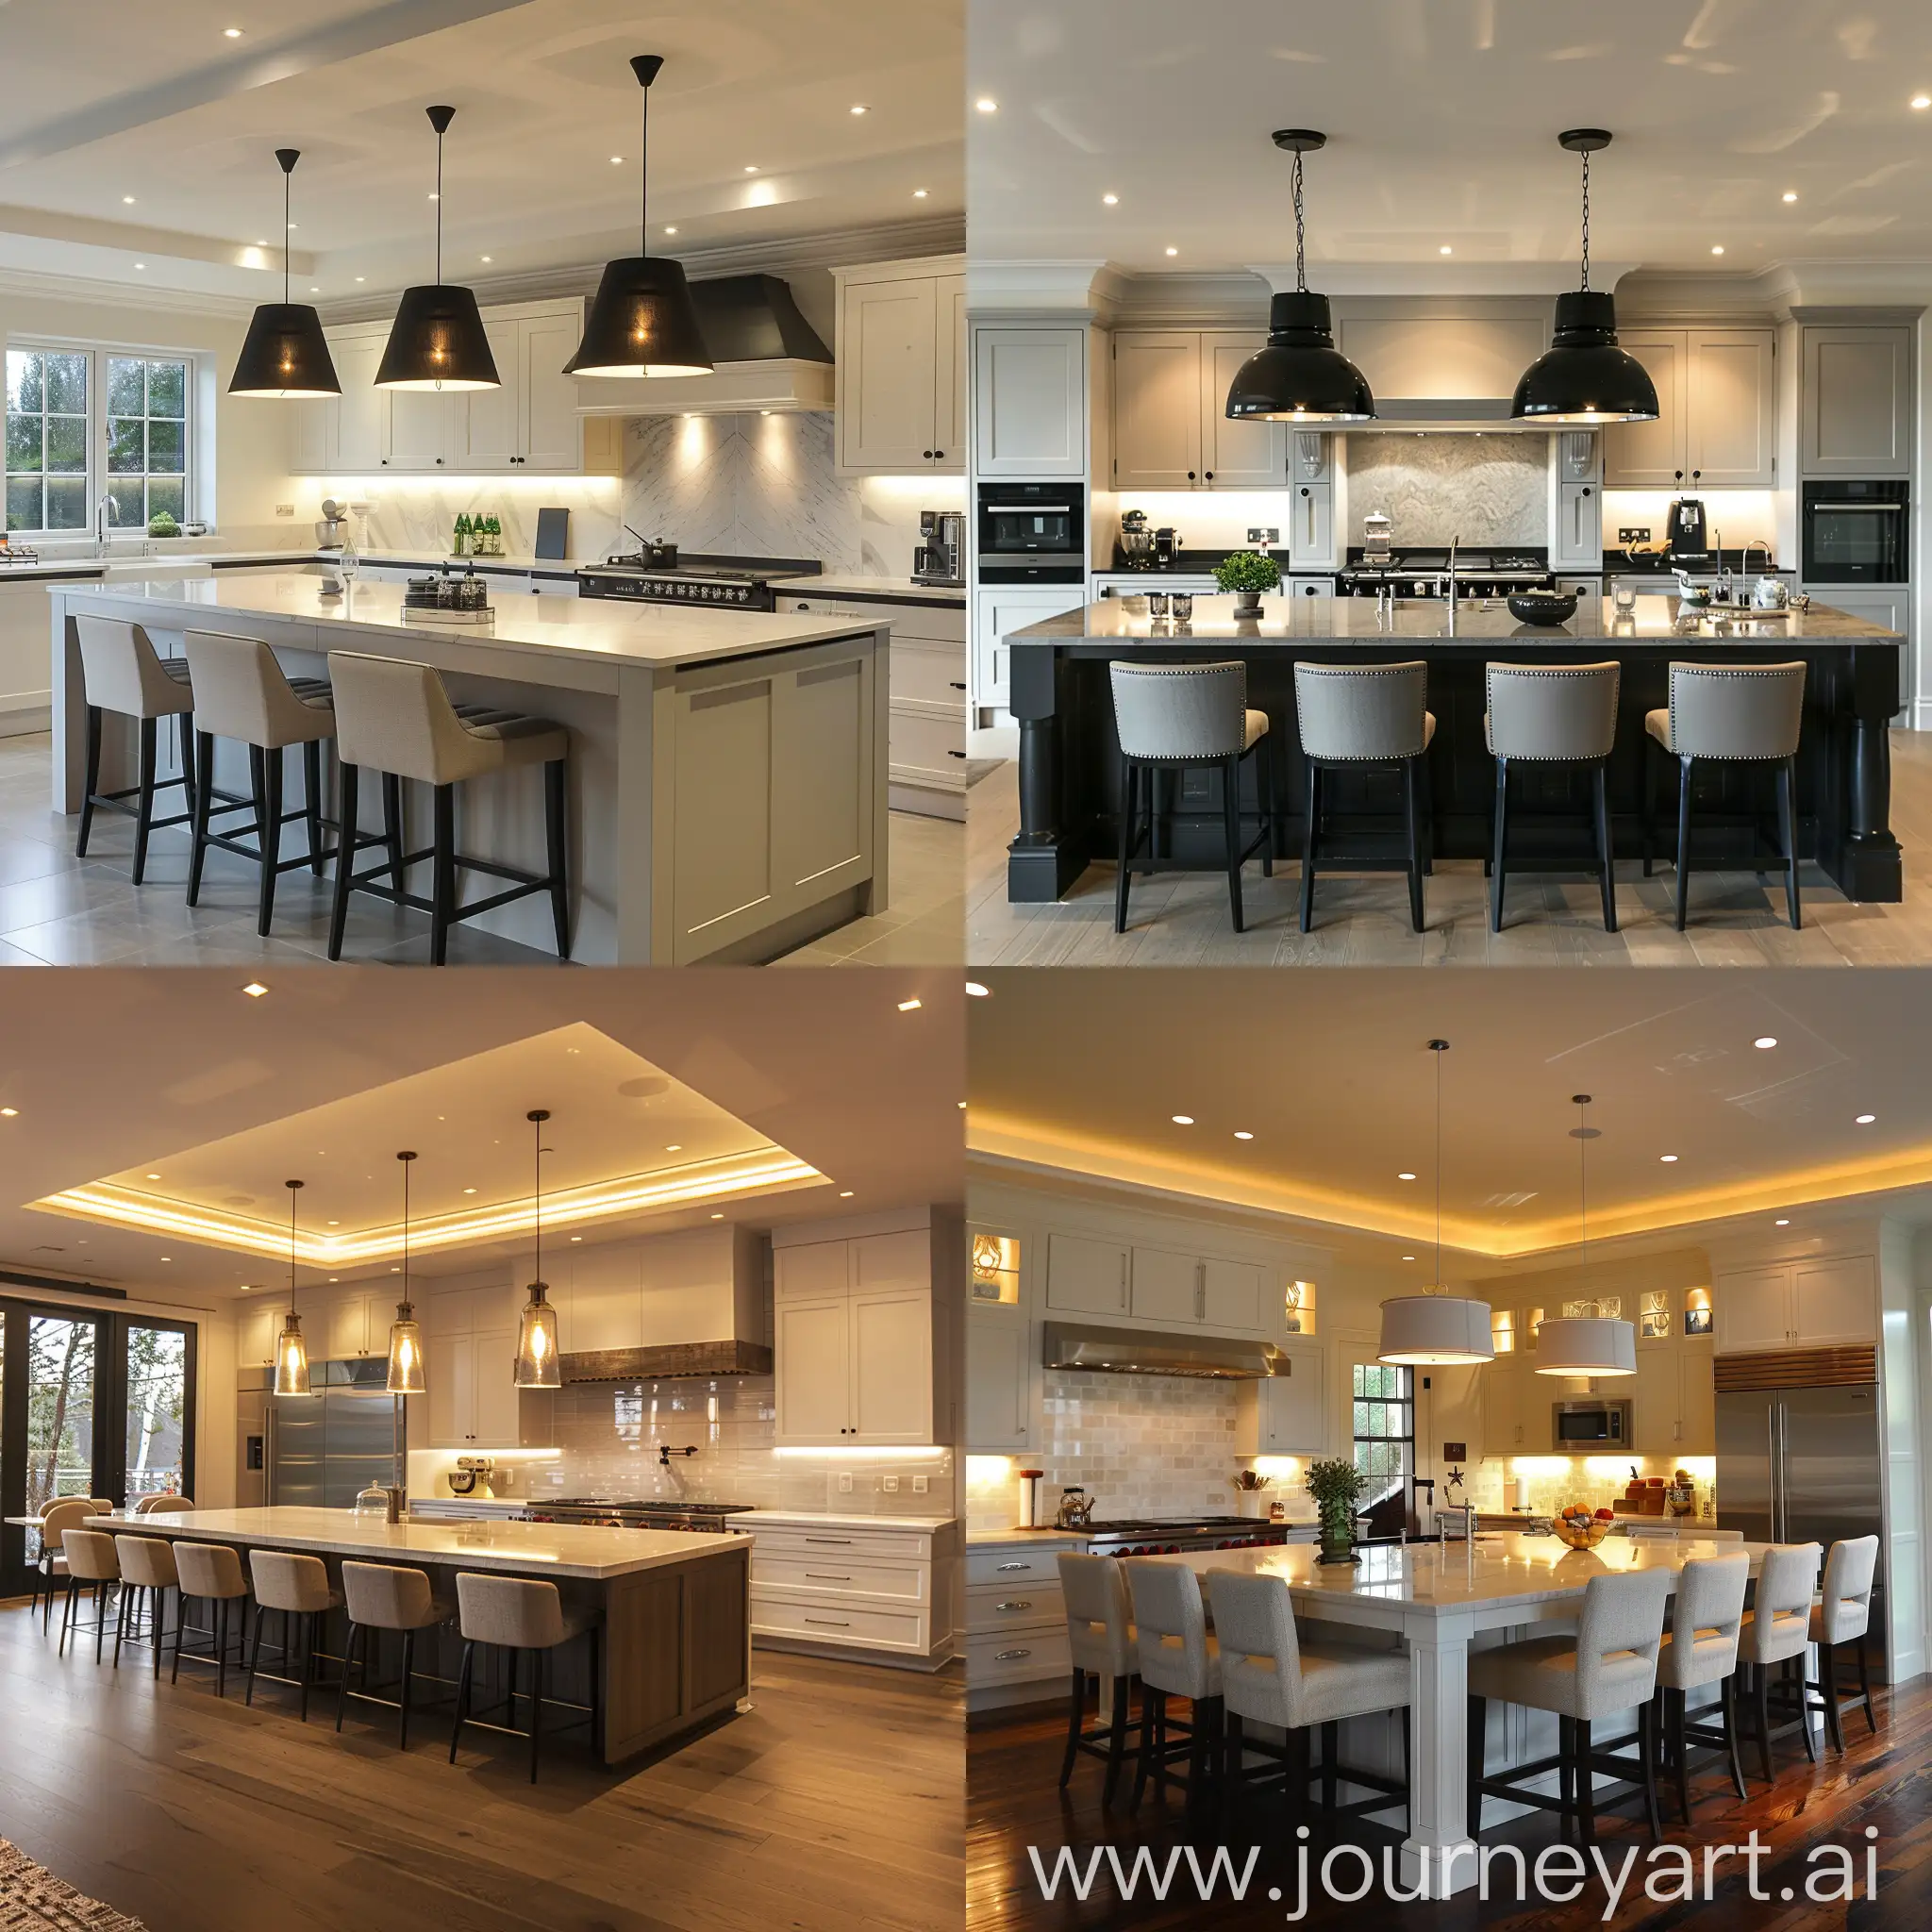 Modern-Kitchen-Interior-with-Pendant-Lamps-and-StateoftheArt-Appliances